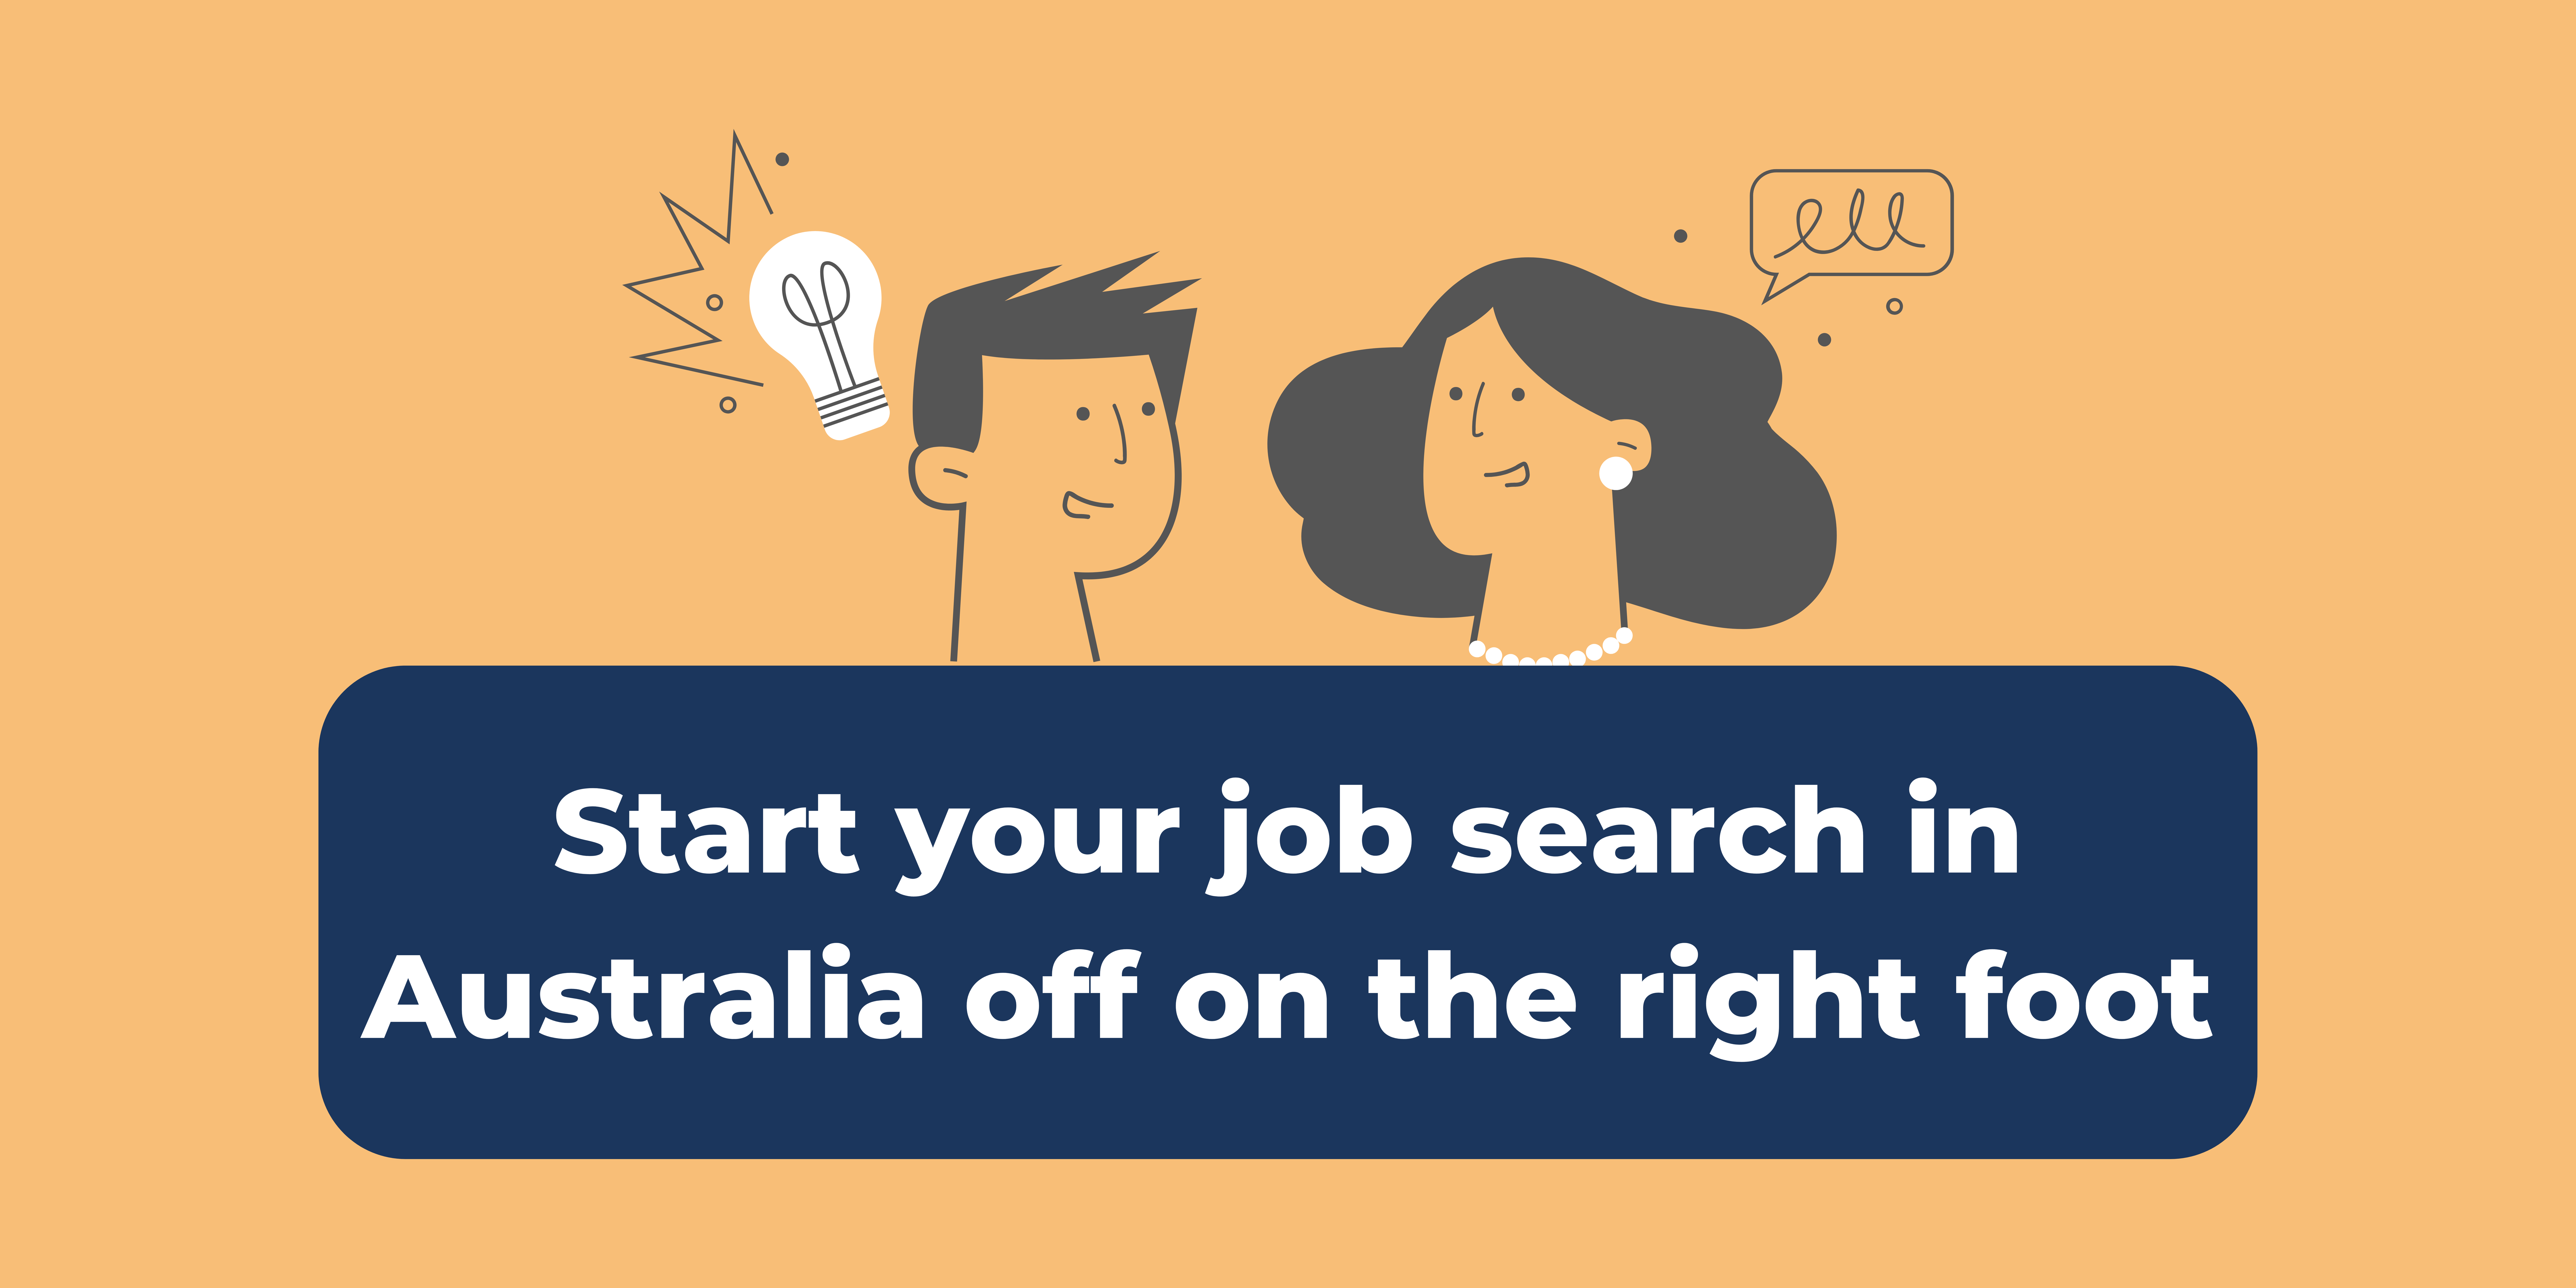 5 tips for you start your job search in Australia off on the right foot